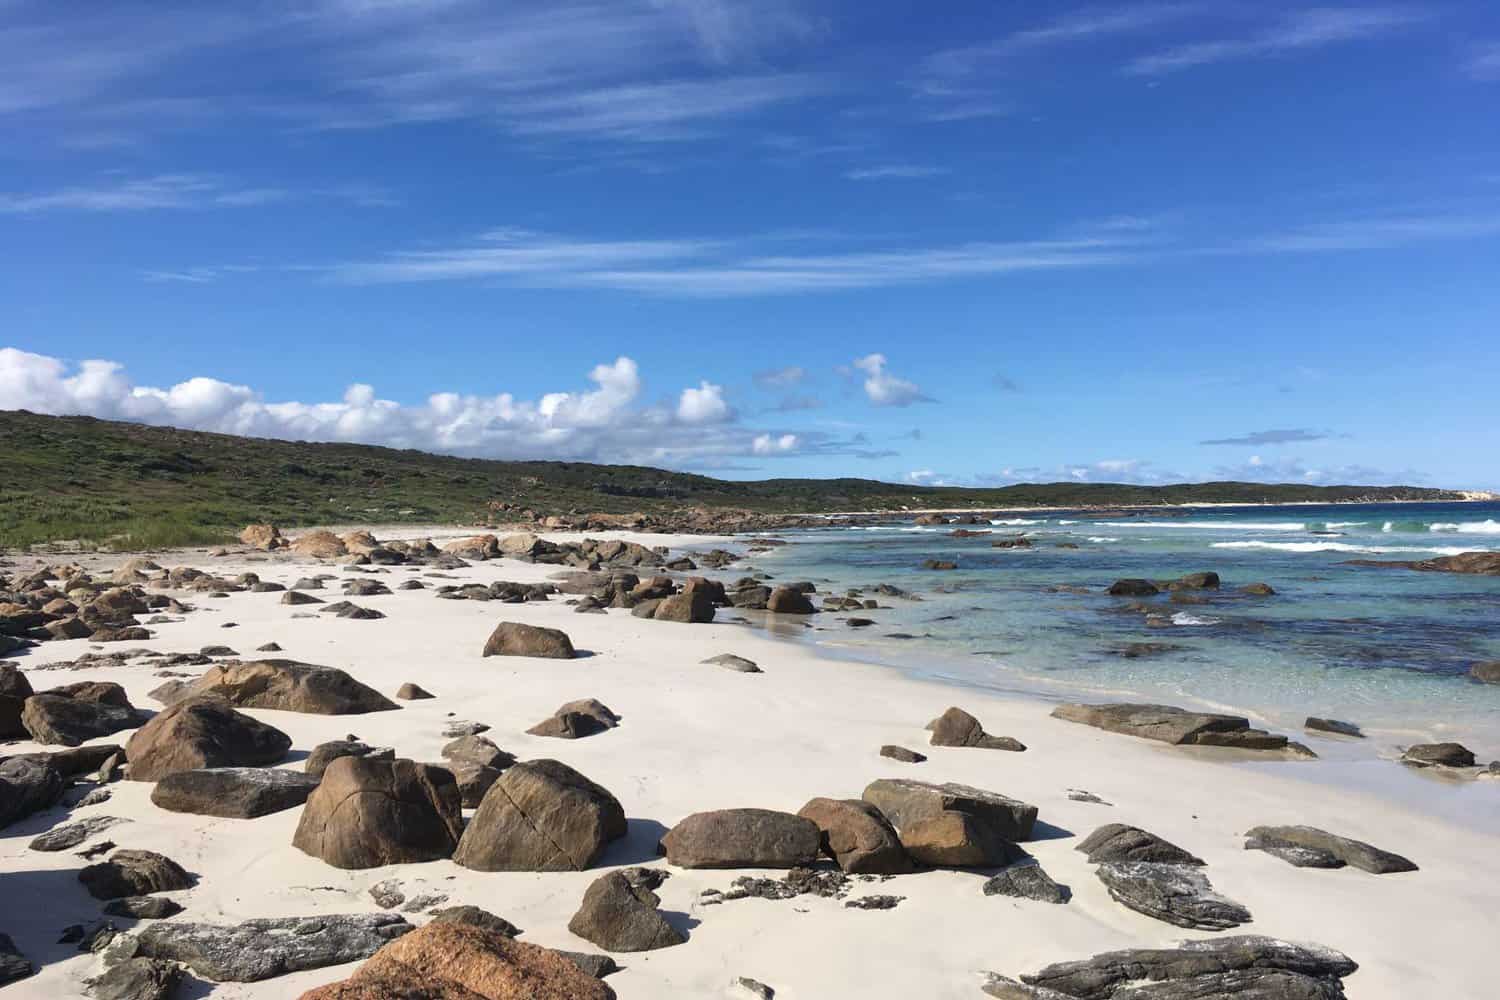 Scattered rocks and clear, shallow waters edge the white sands of a secluded Margaret River beach, set against a backdrop of lush greenery and a bright blue sky dotted with fluffy clouds.